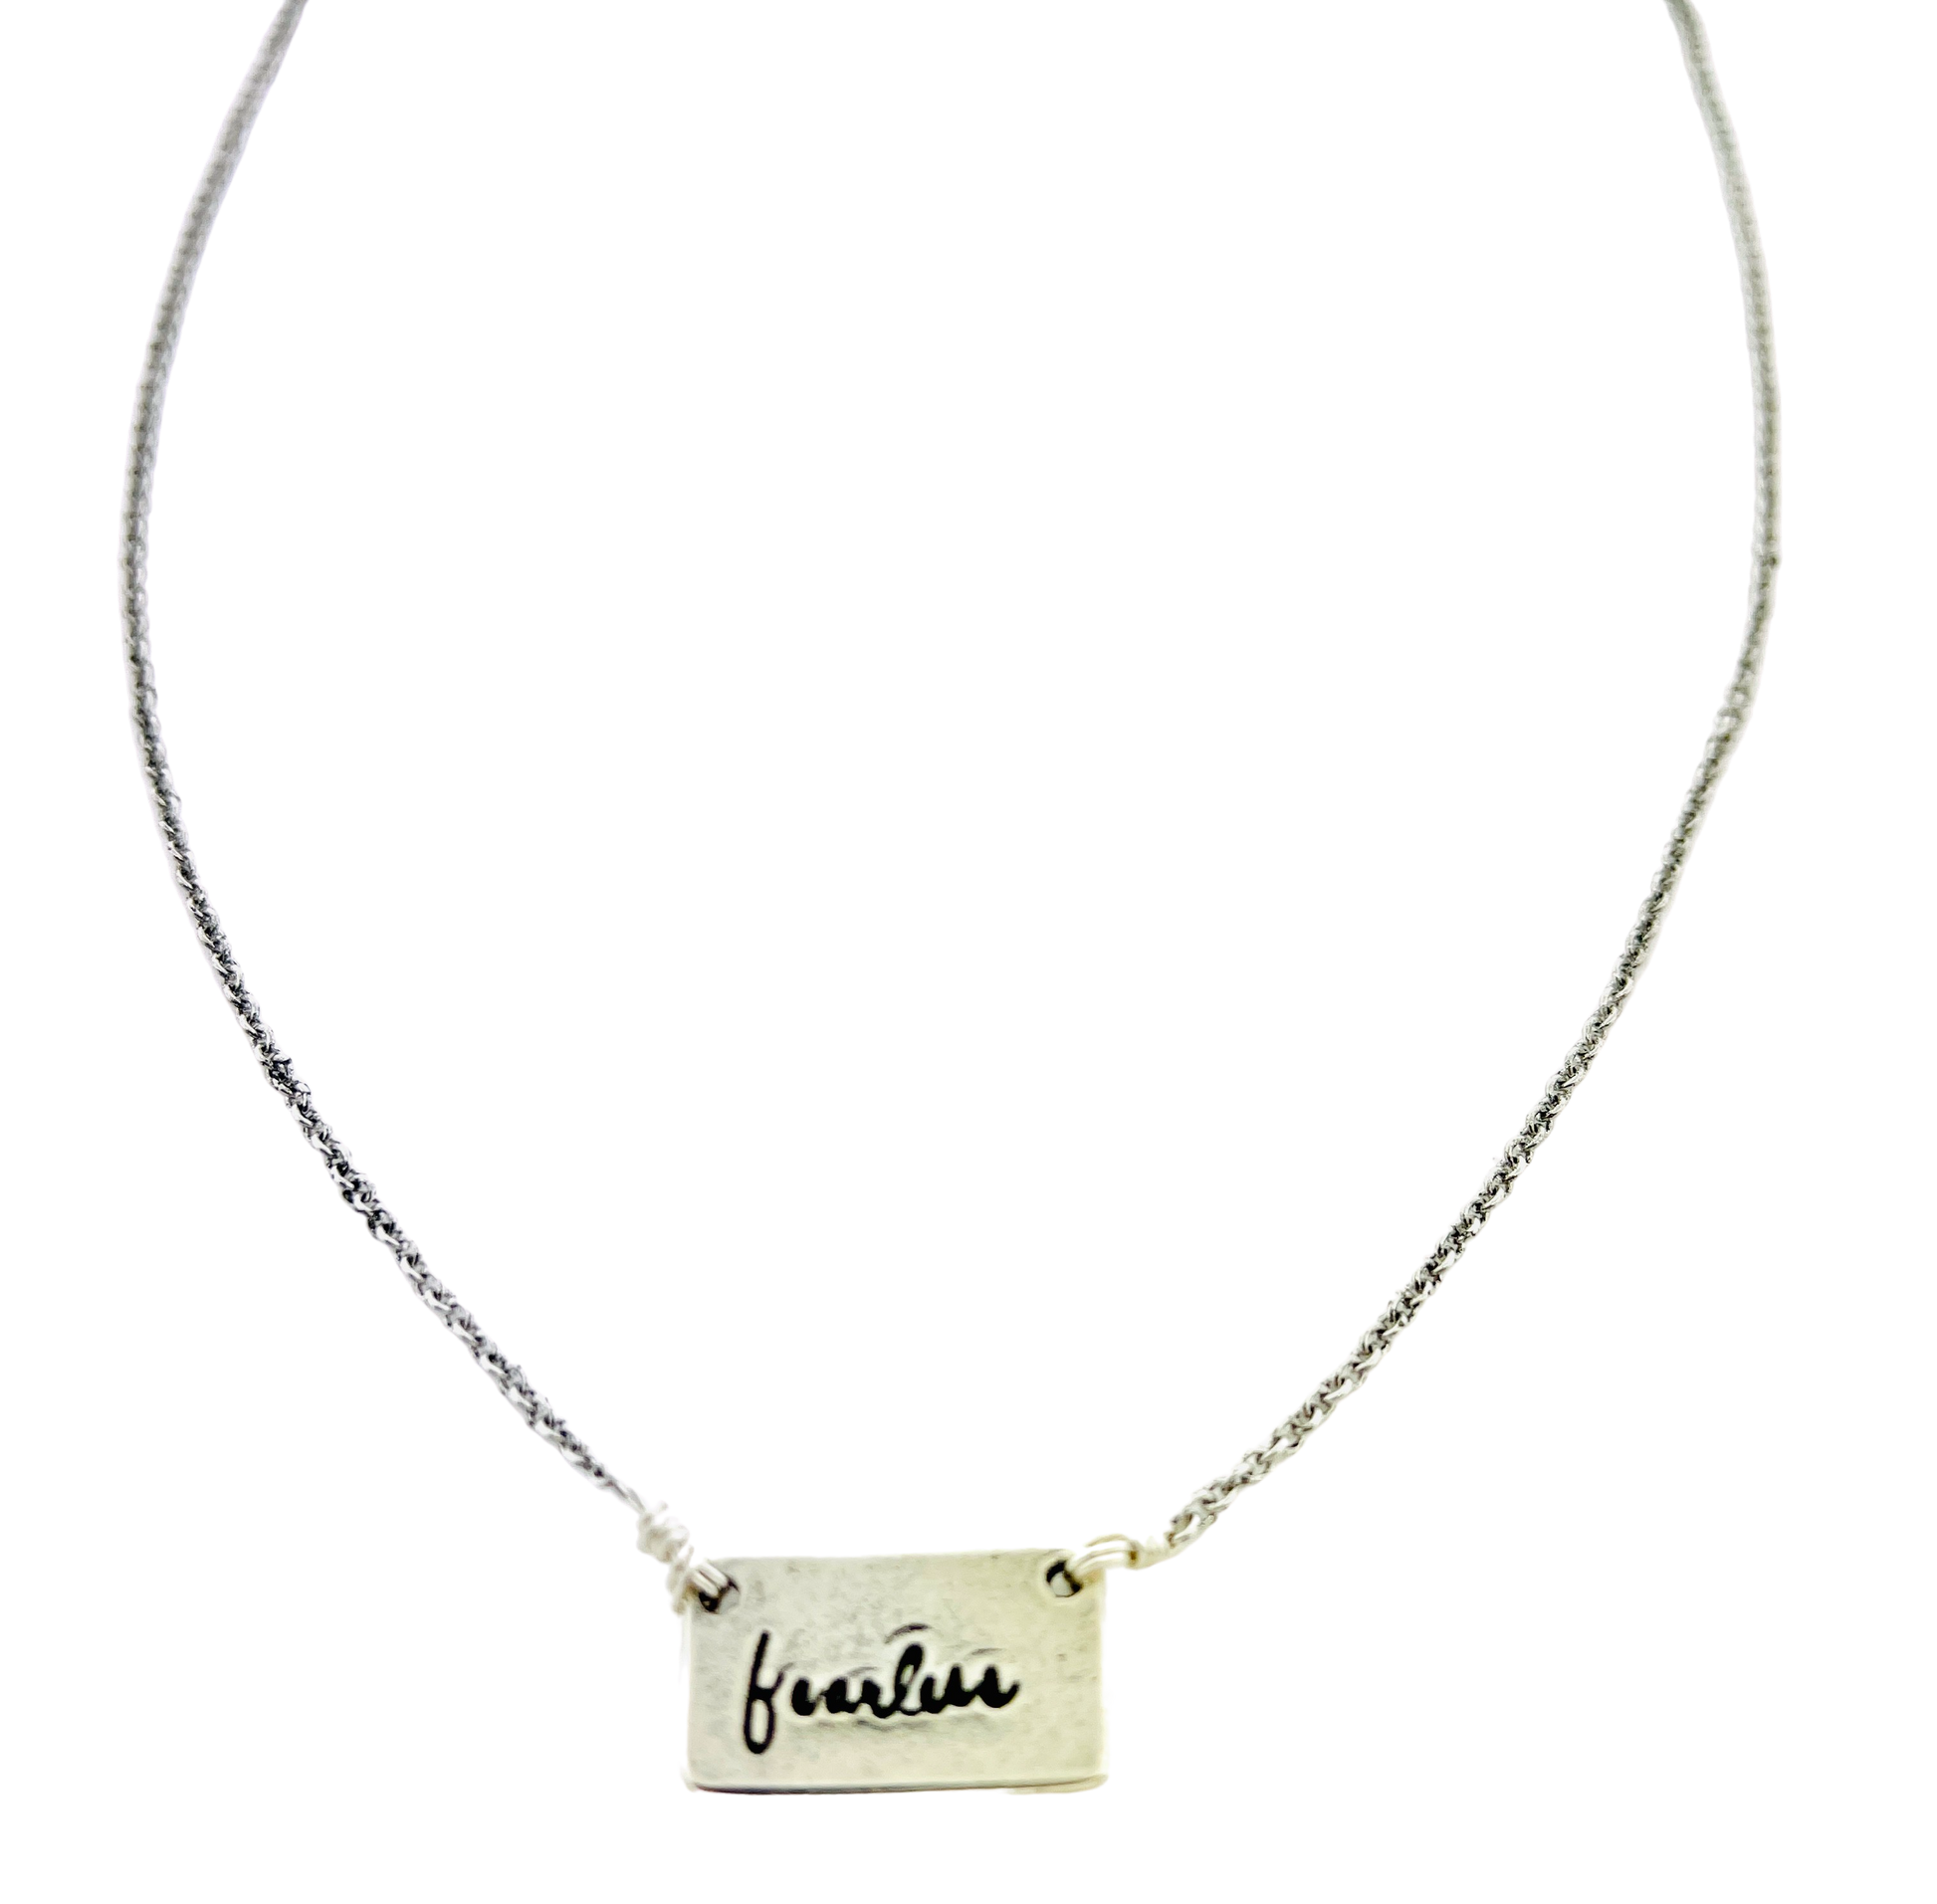 fearless hand stamped inspirational necklace